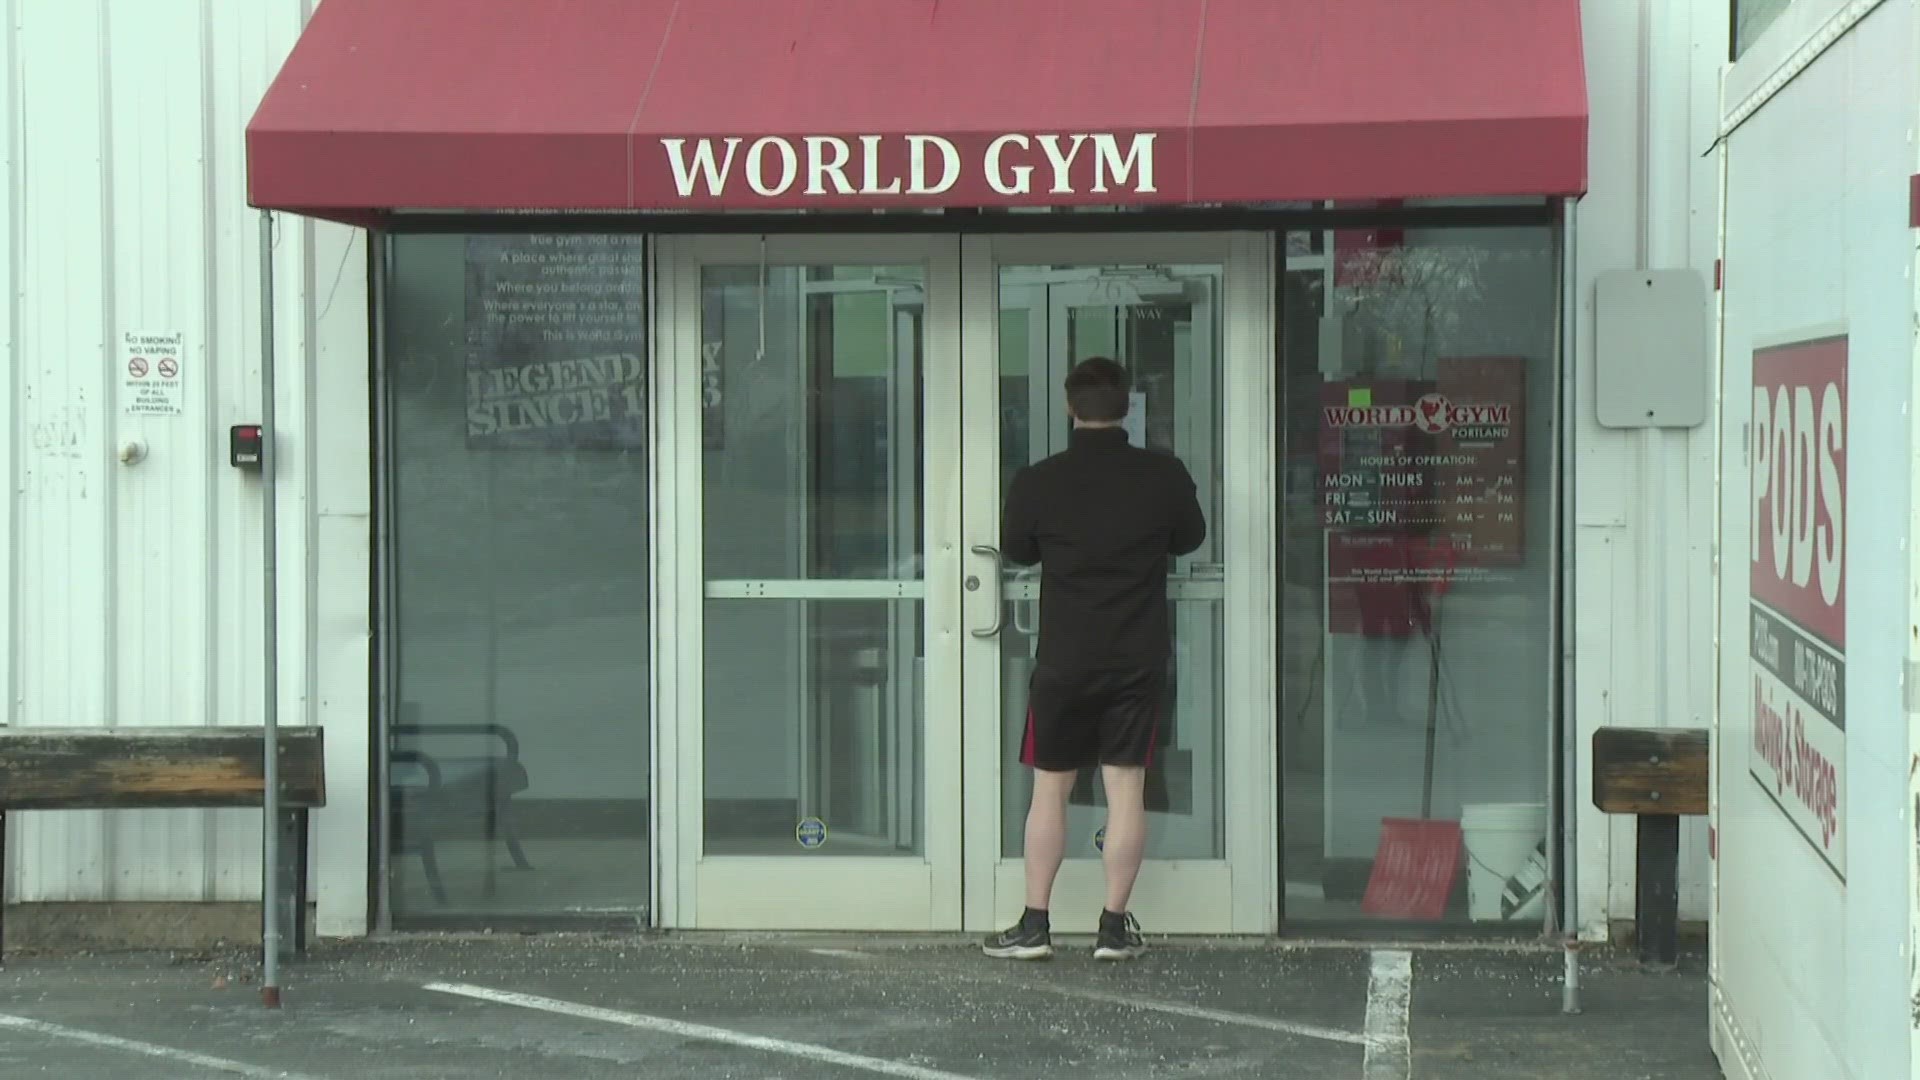 There was a sign at the World Gym in Portland saying it was moving, but the sign didn't name a location. Many customers were confused about their membership.